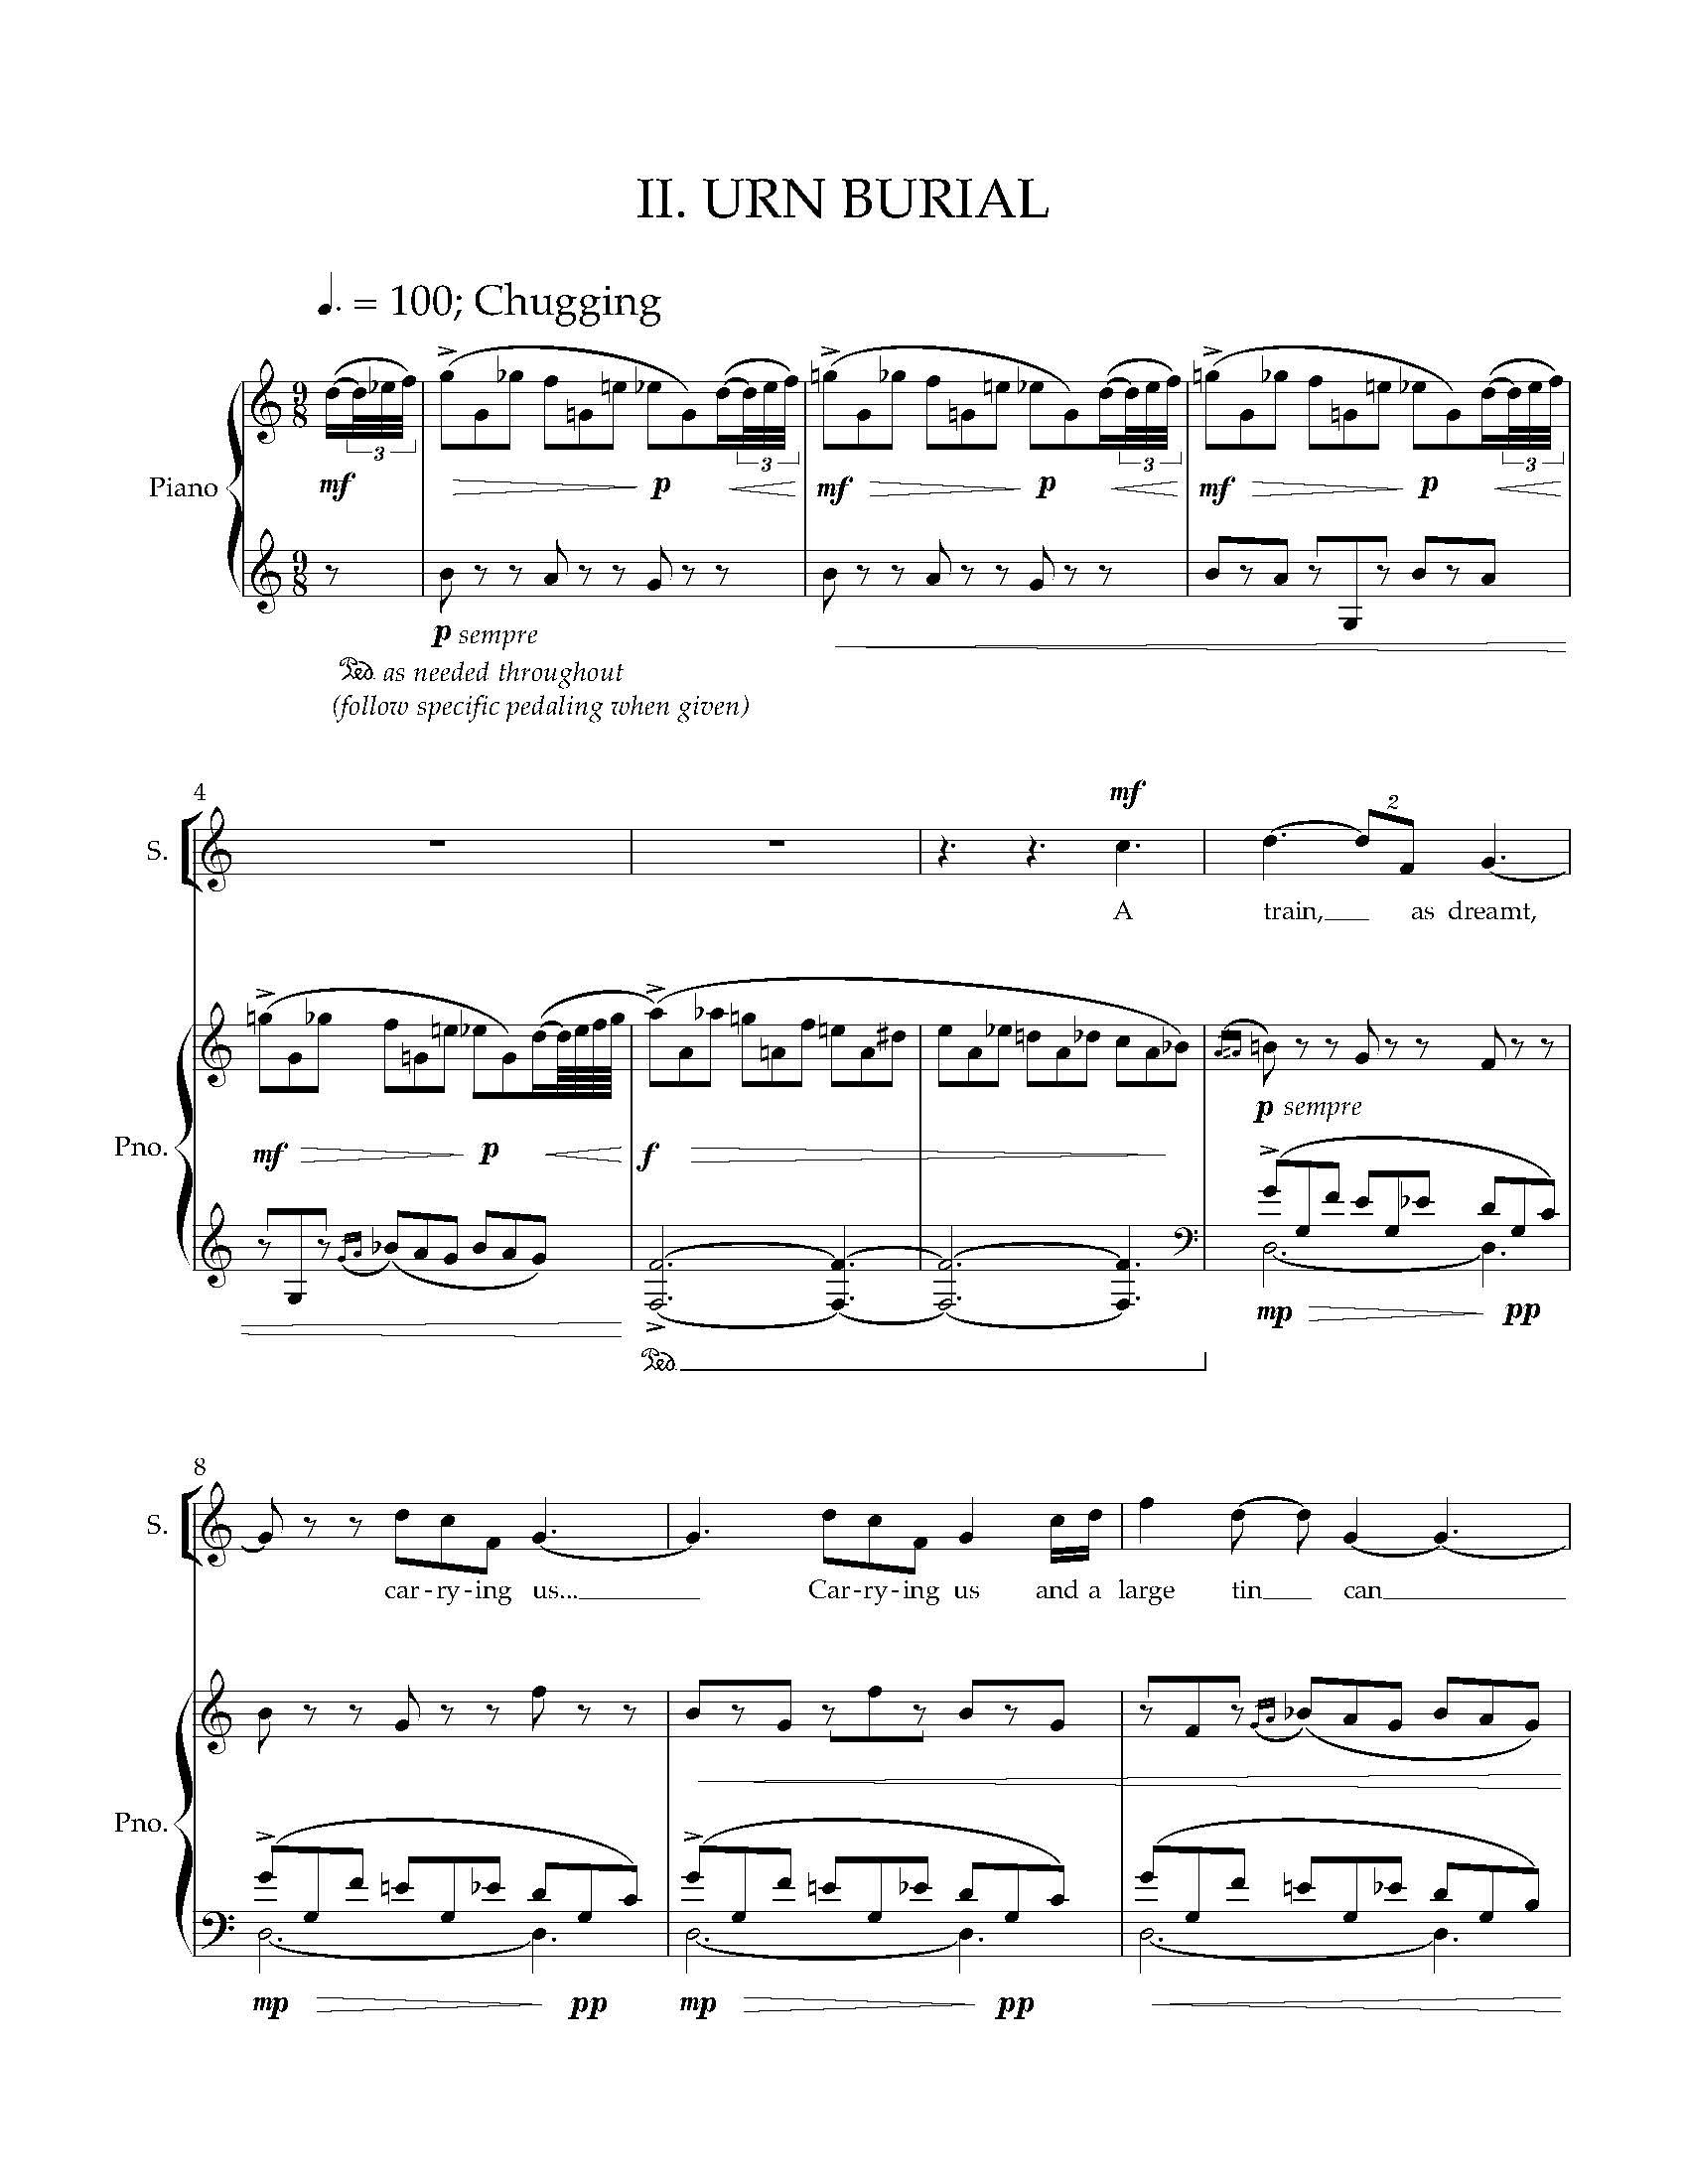 Sky - Complete Score (Revised)_Page_12.jpg